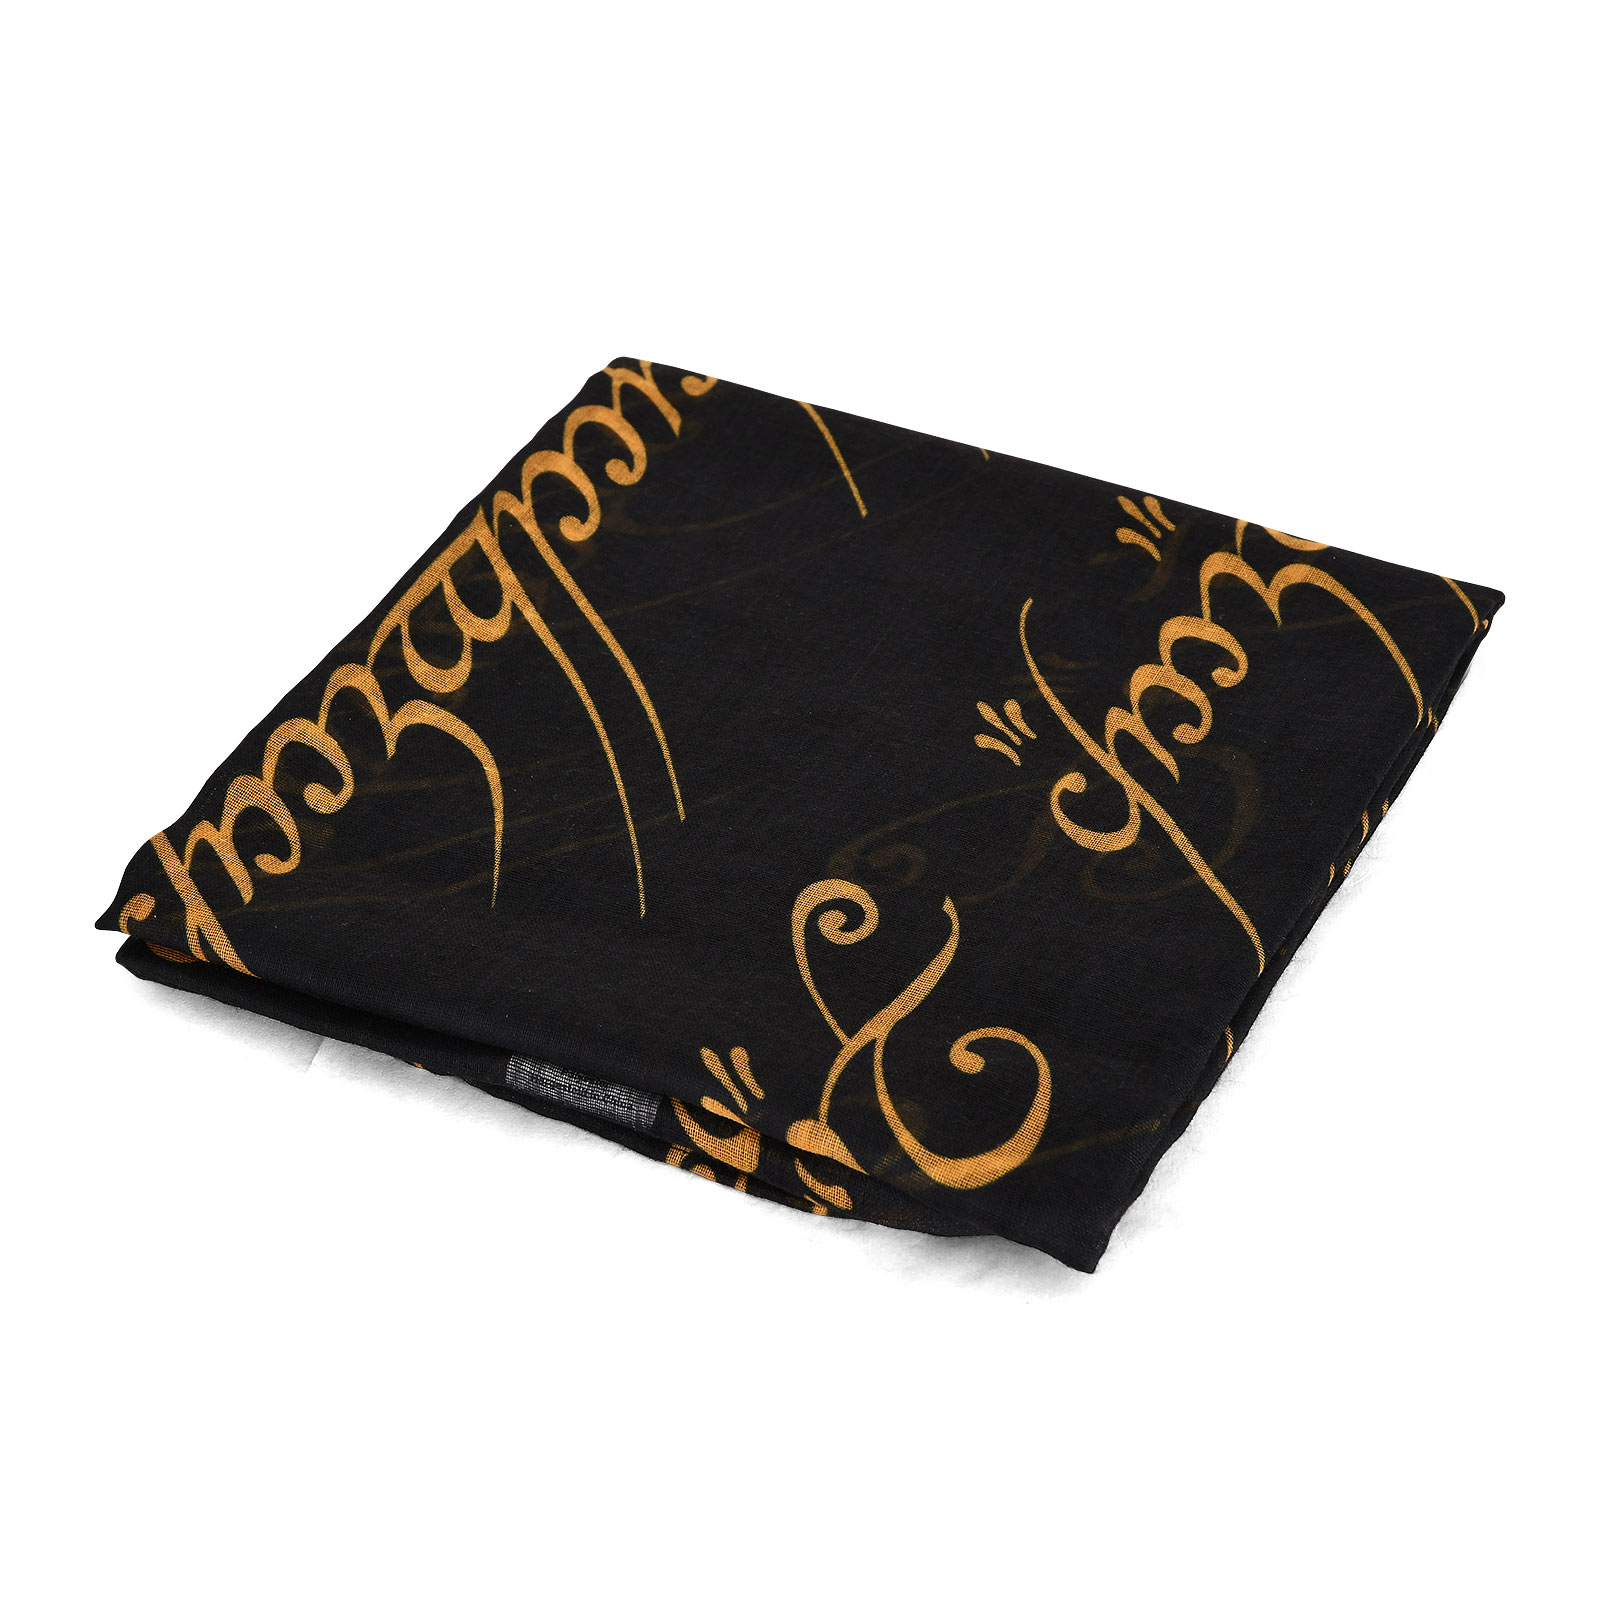 Lord of the Rings - The One Loop Scarf black